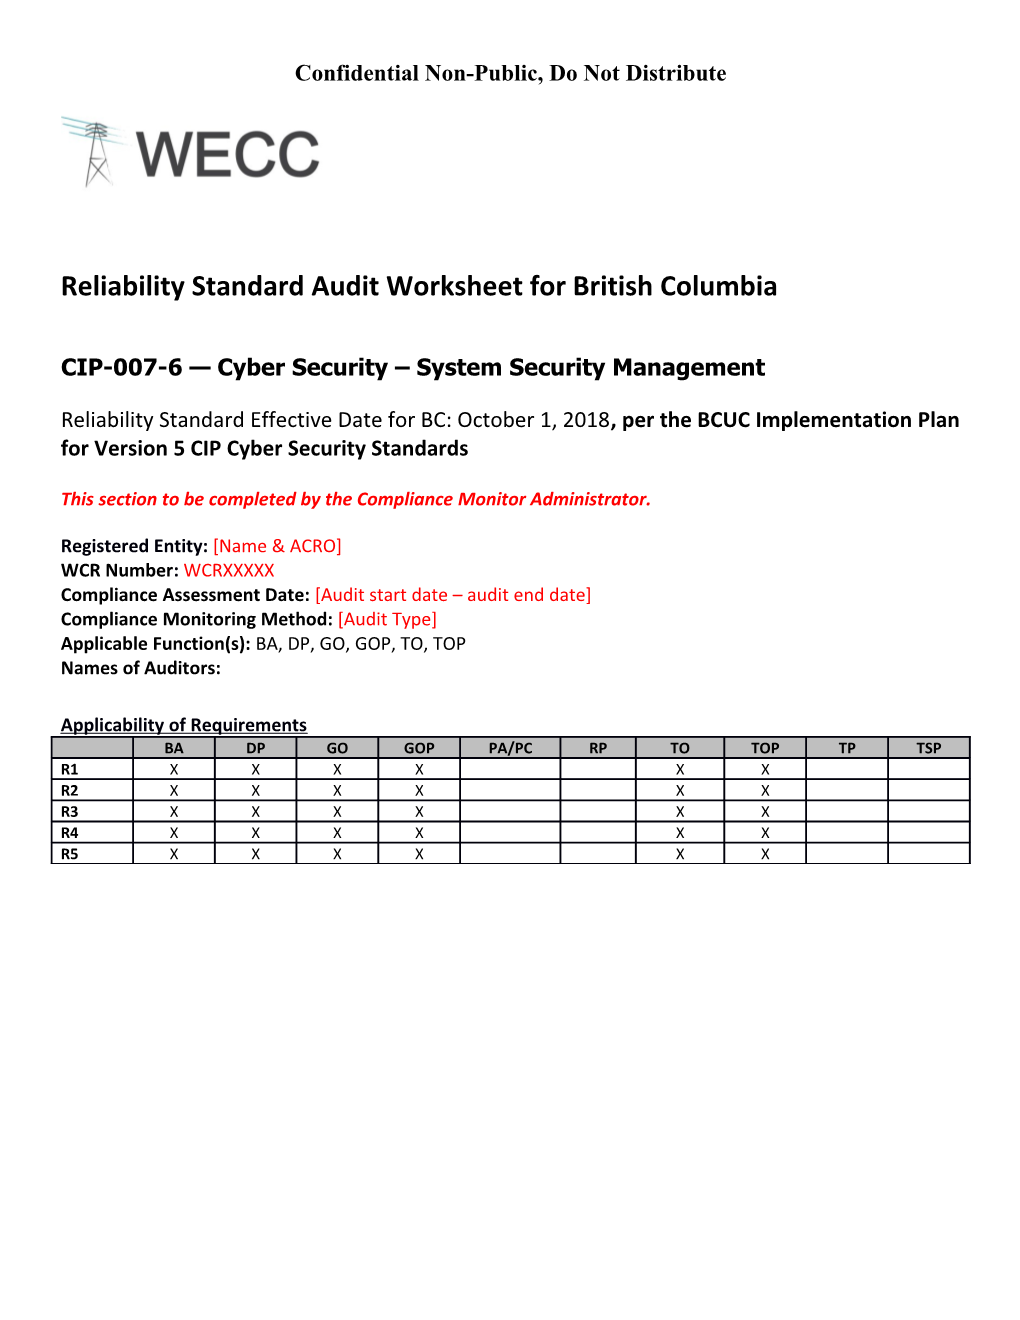 CIP-007-6 - Cyber Security - System Security Management